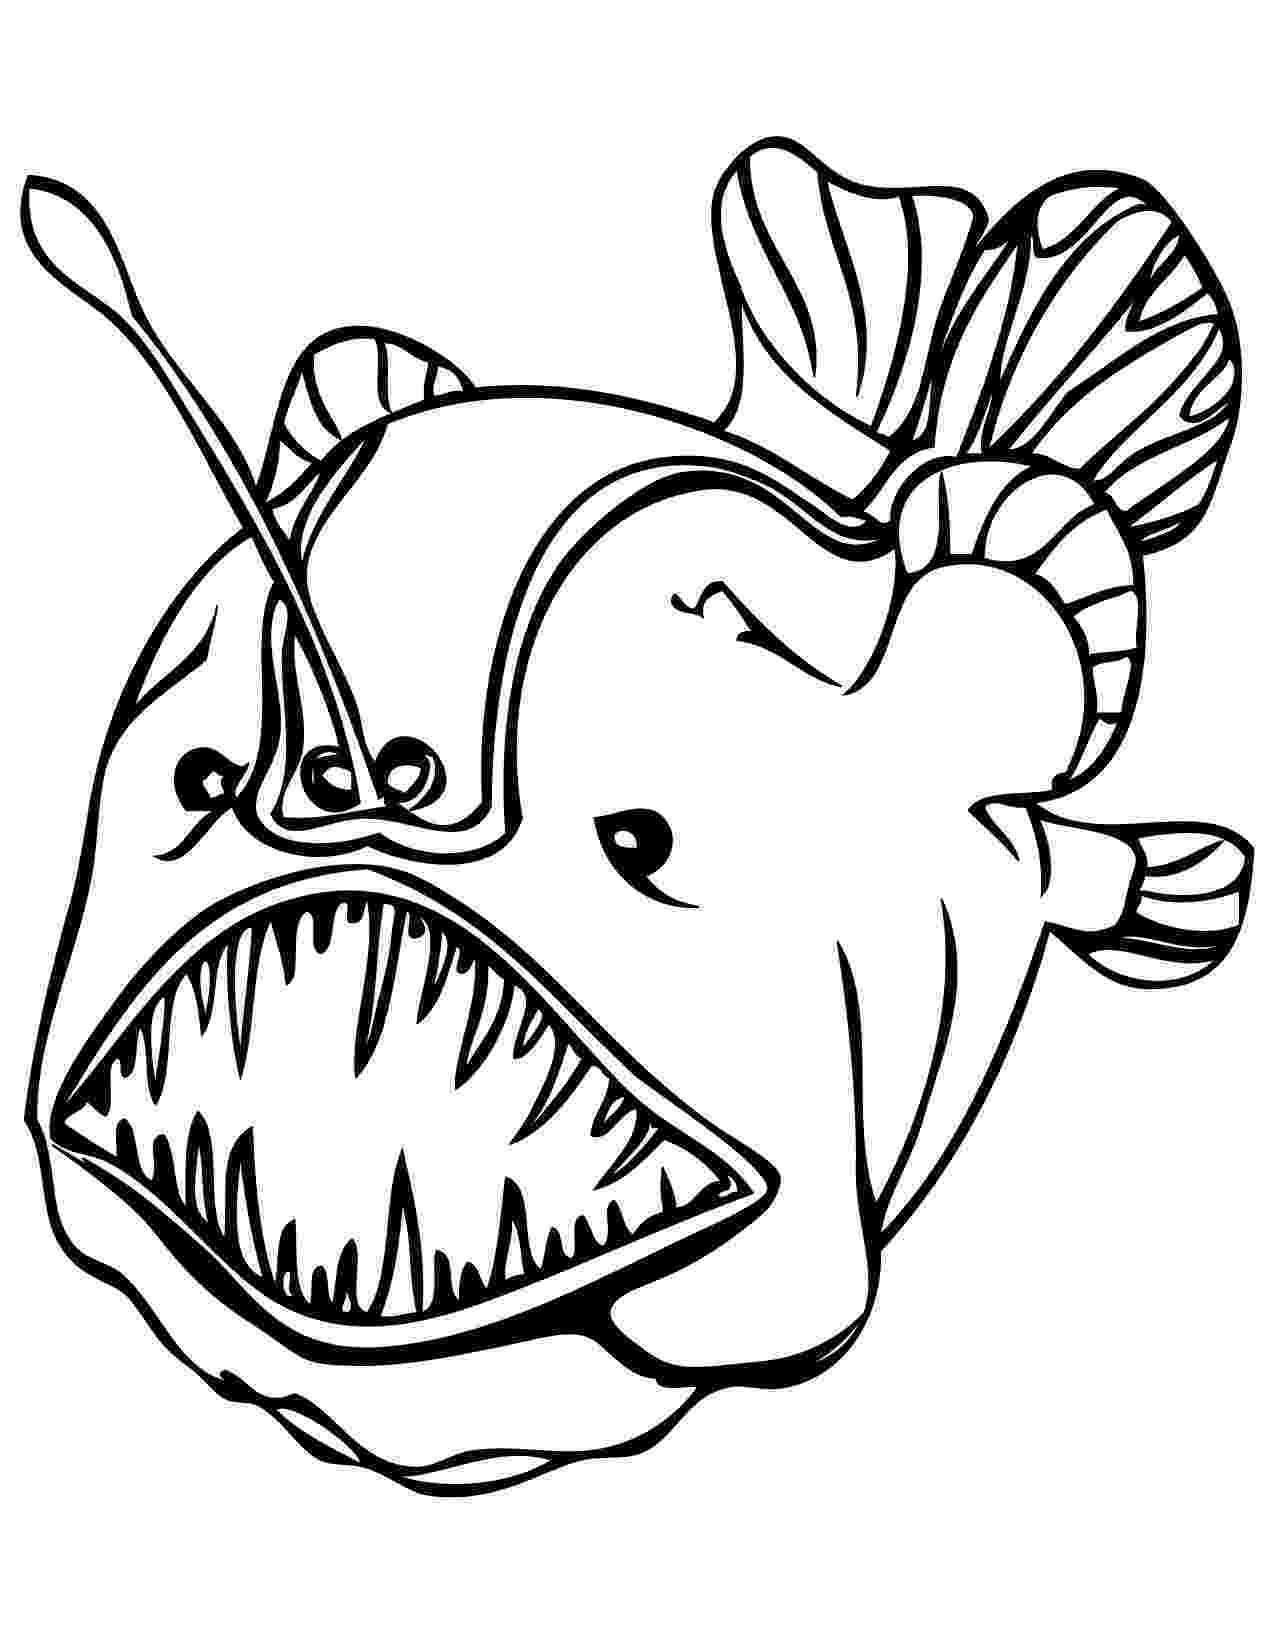 fish color page print download cute and educative fish coloring pages color fish page 